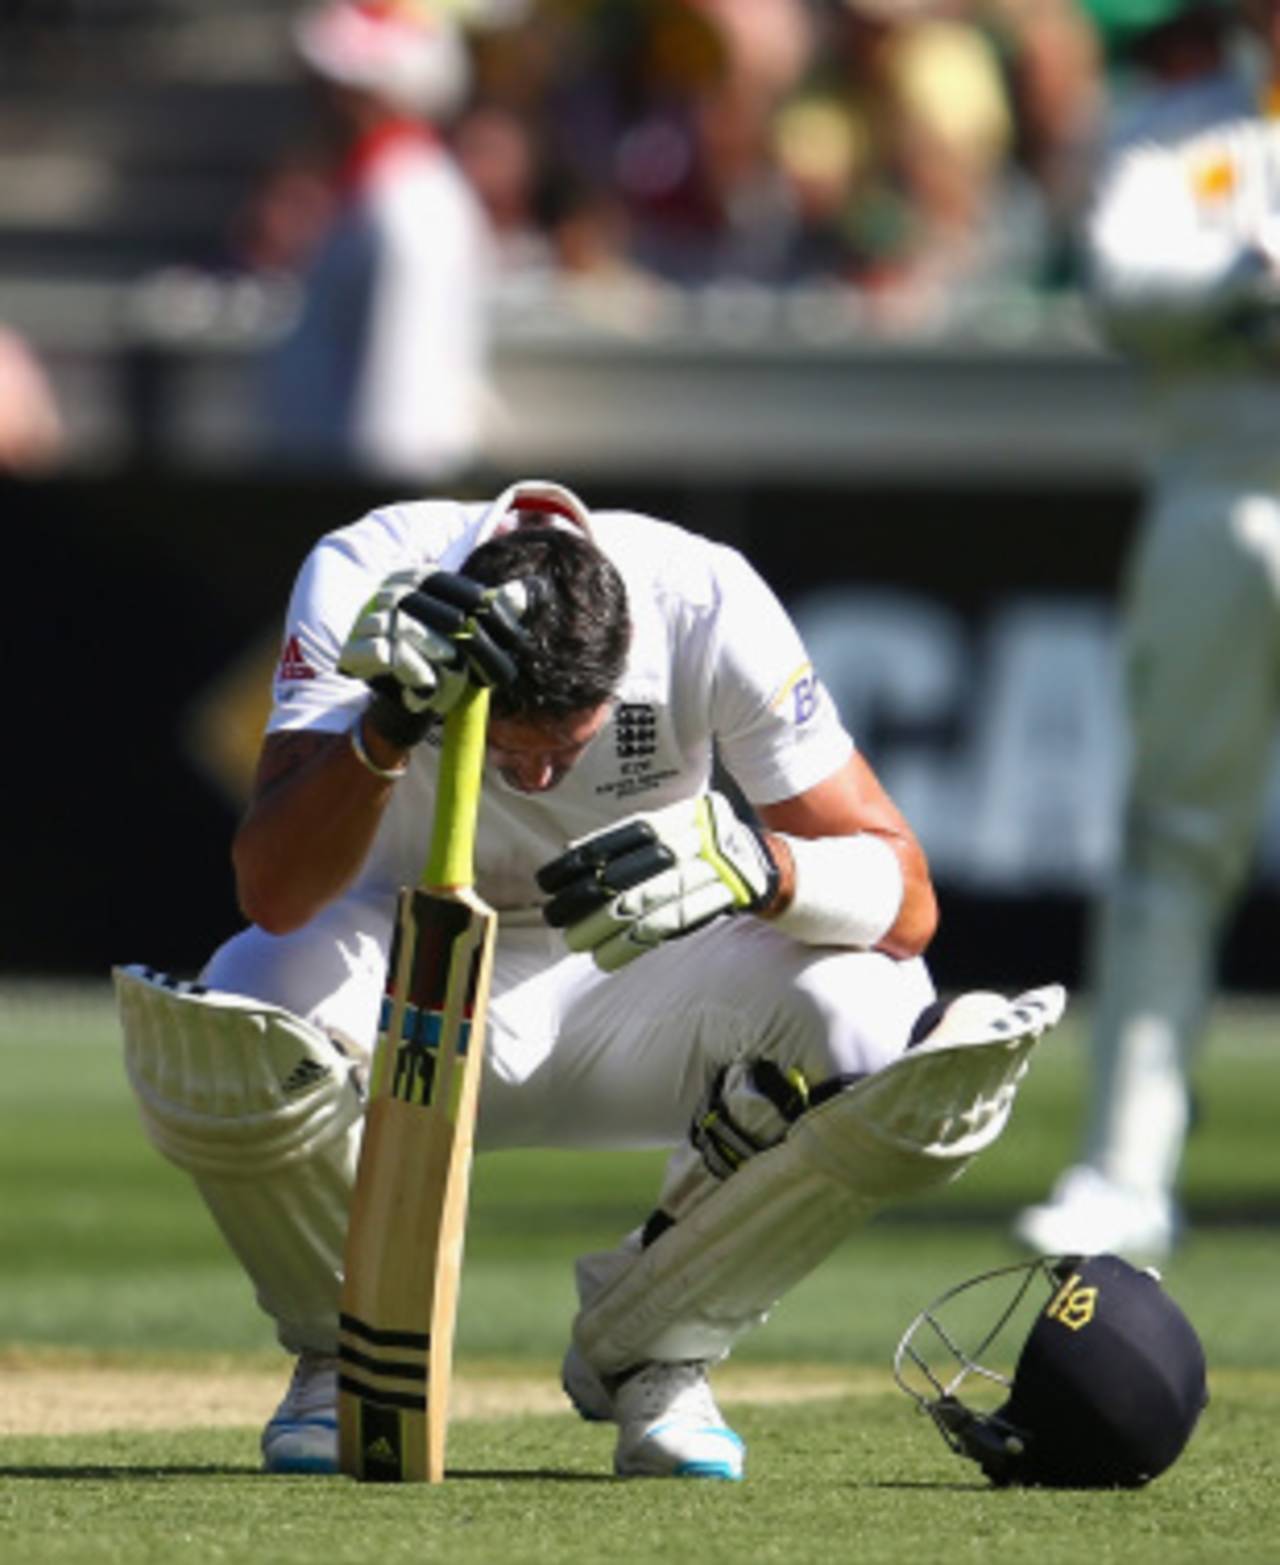 Kevin Pietersen had to battle illness during his innings, Australia v England, 4th Test, Melbourne, 1st day, December 26, 2013